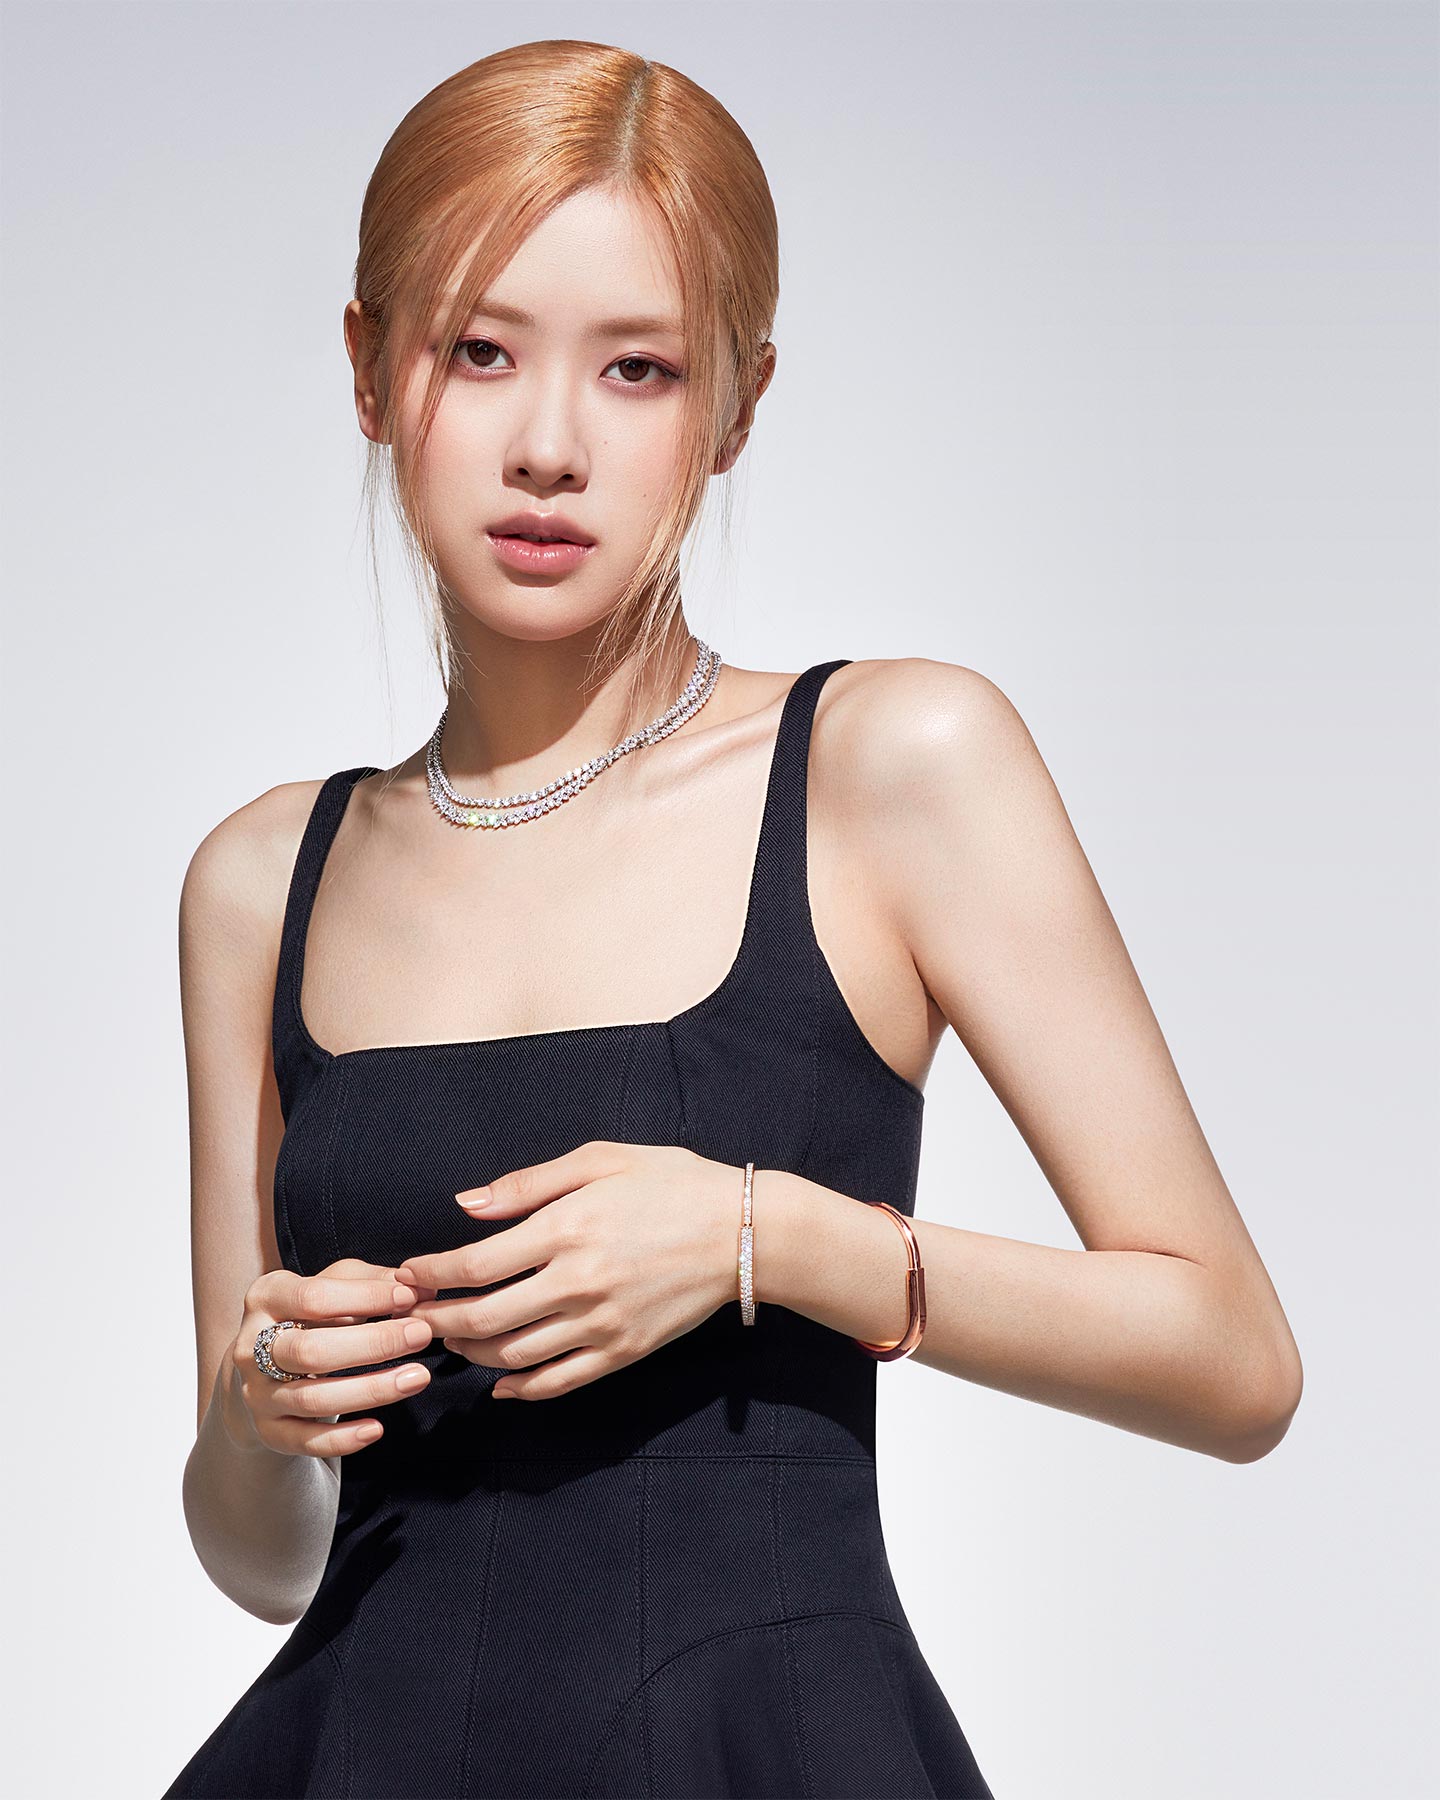 In January 2023, Tiffany & Co. celebrated the global launch of the Tiffany Lock collection with a new campaign starring brand ambassador Rosé from girl group Blackpink. © Tiffany & Co.